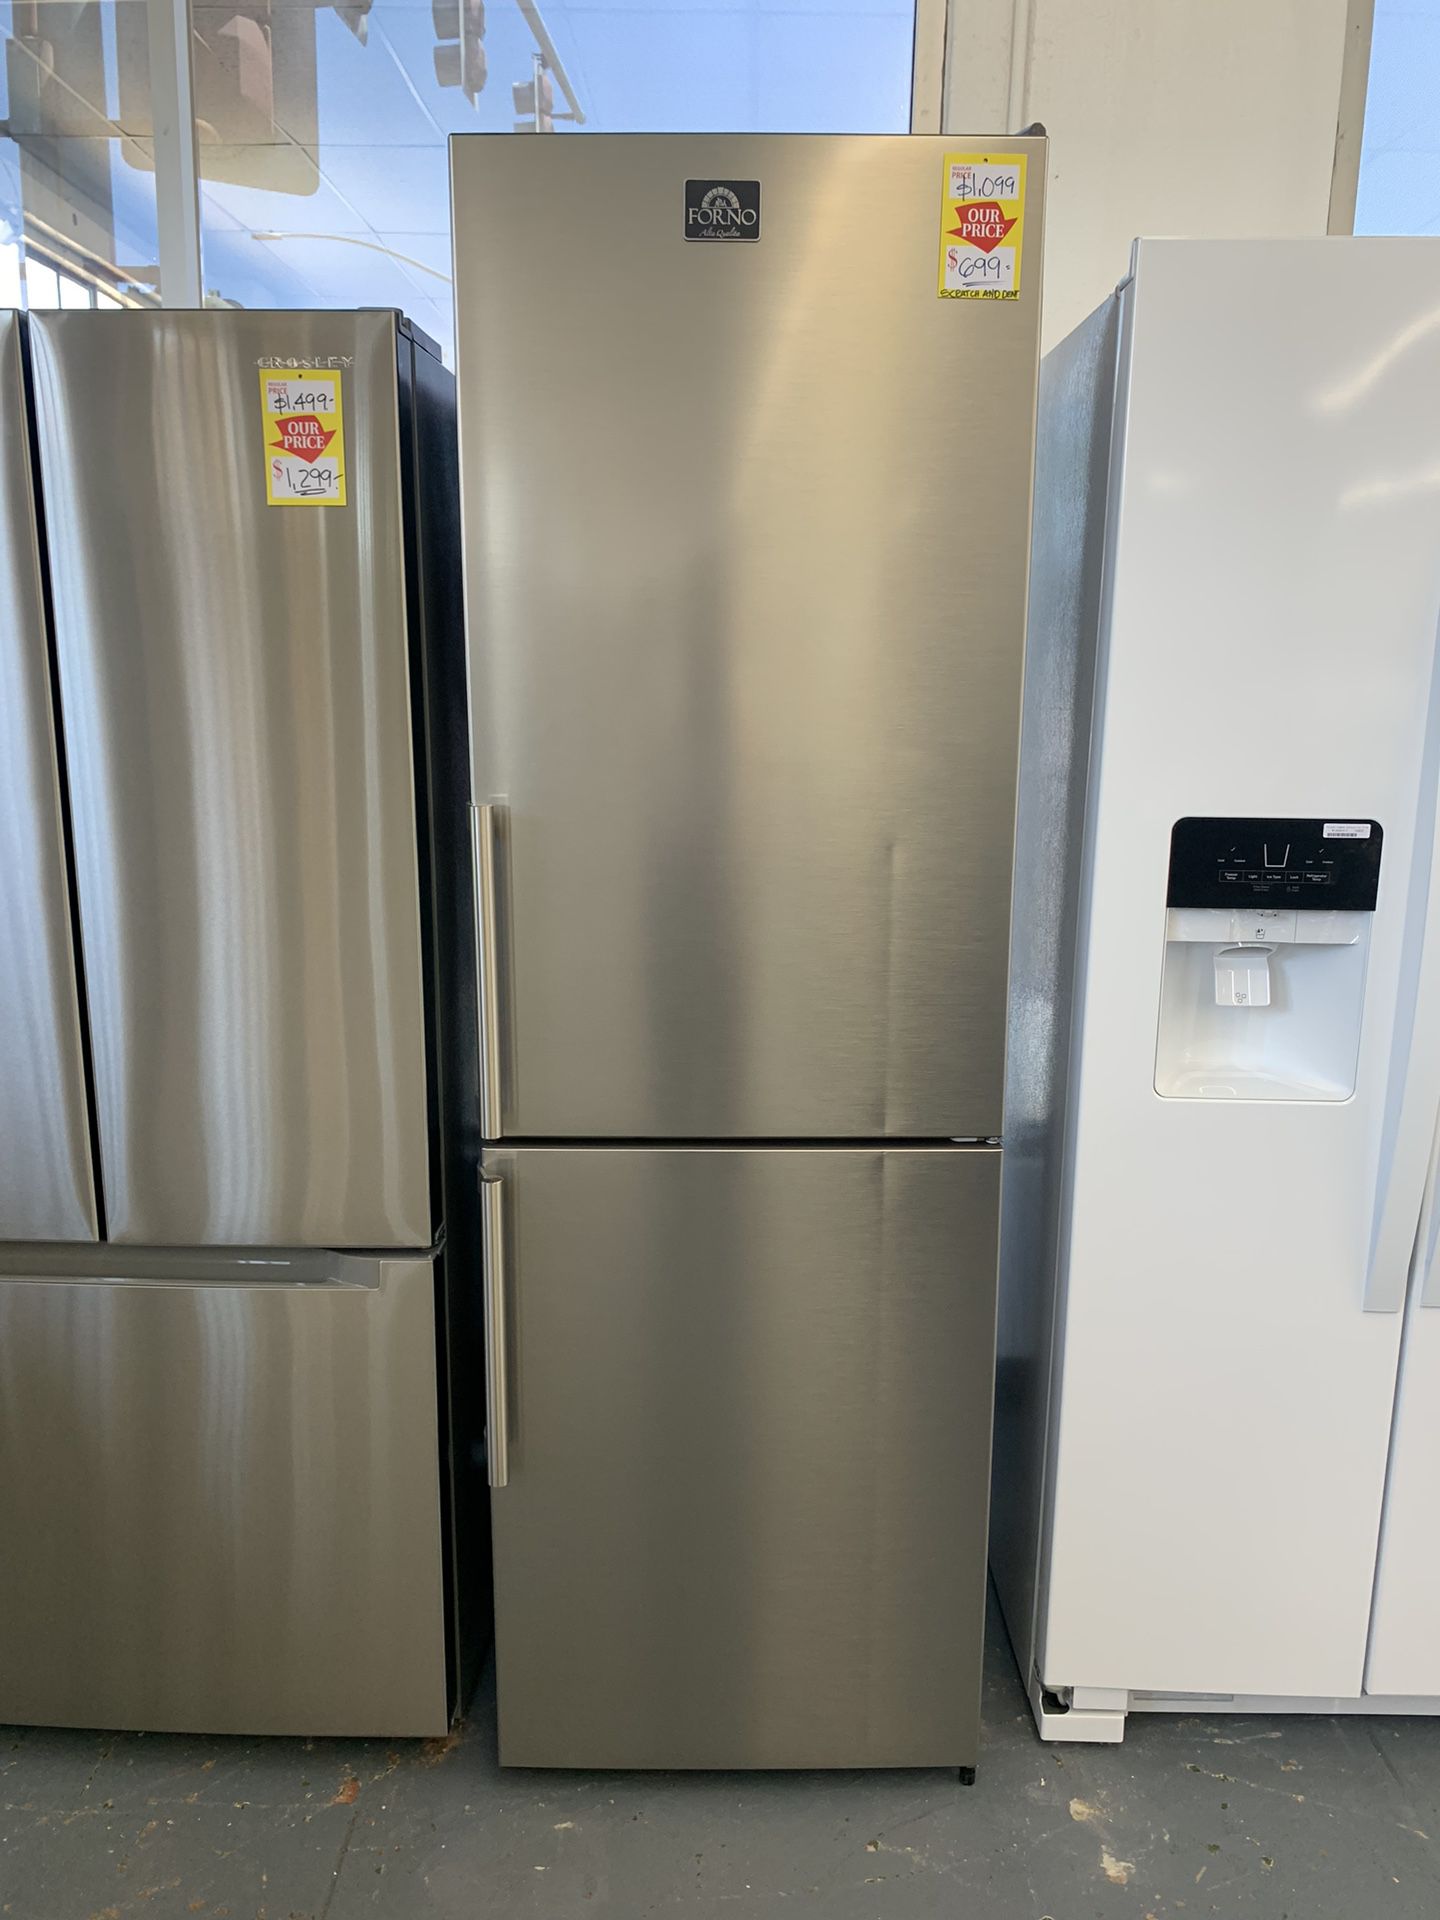 FORNO 23.4 Bottom Freezer Refrigerator Right Swing 10.8 Cu Ft , Stainless Steel $699.00